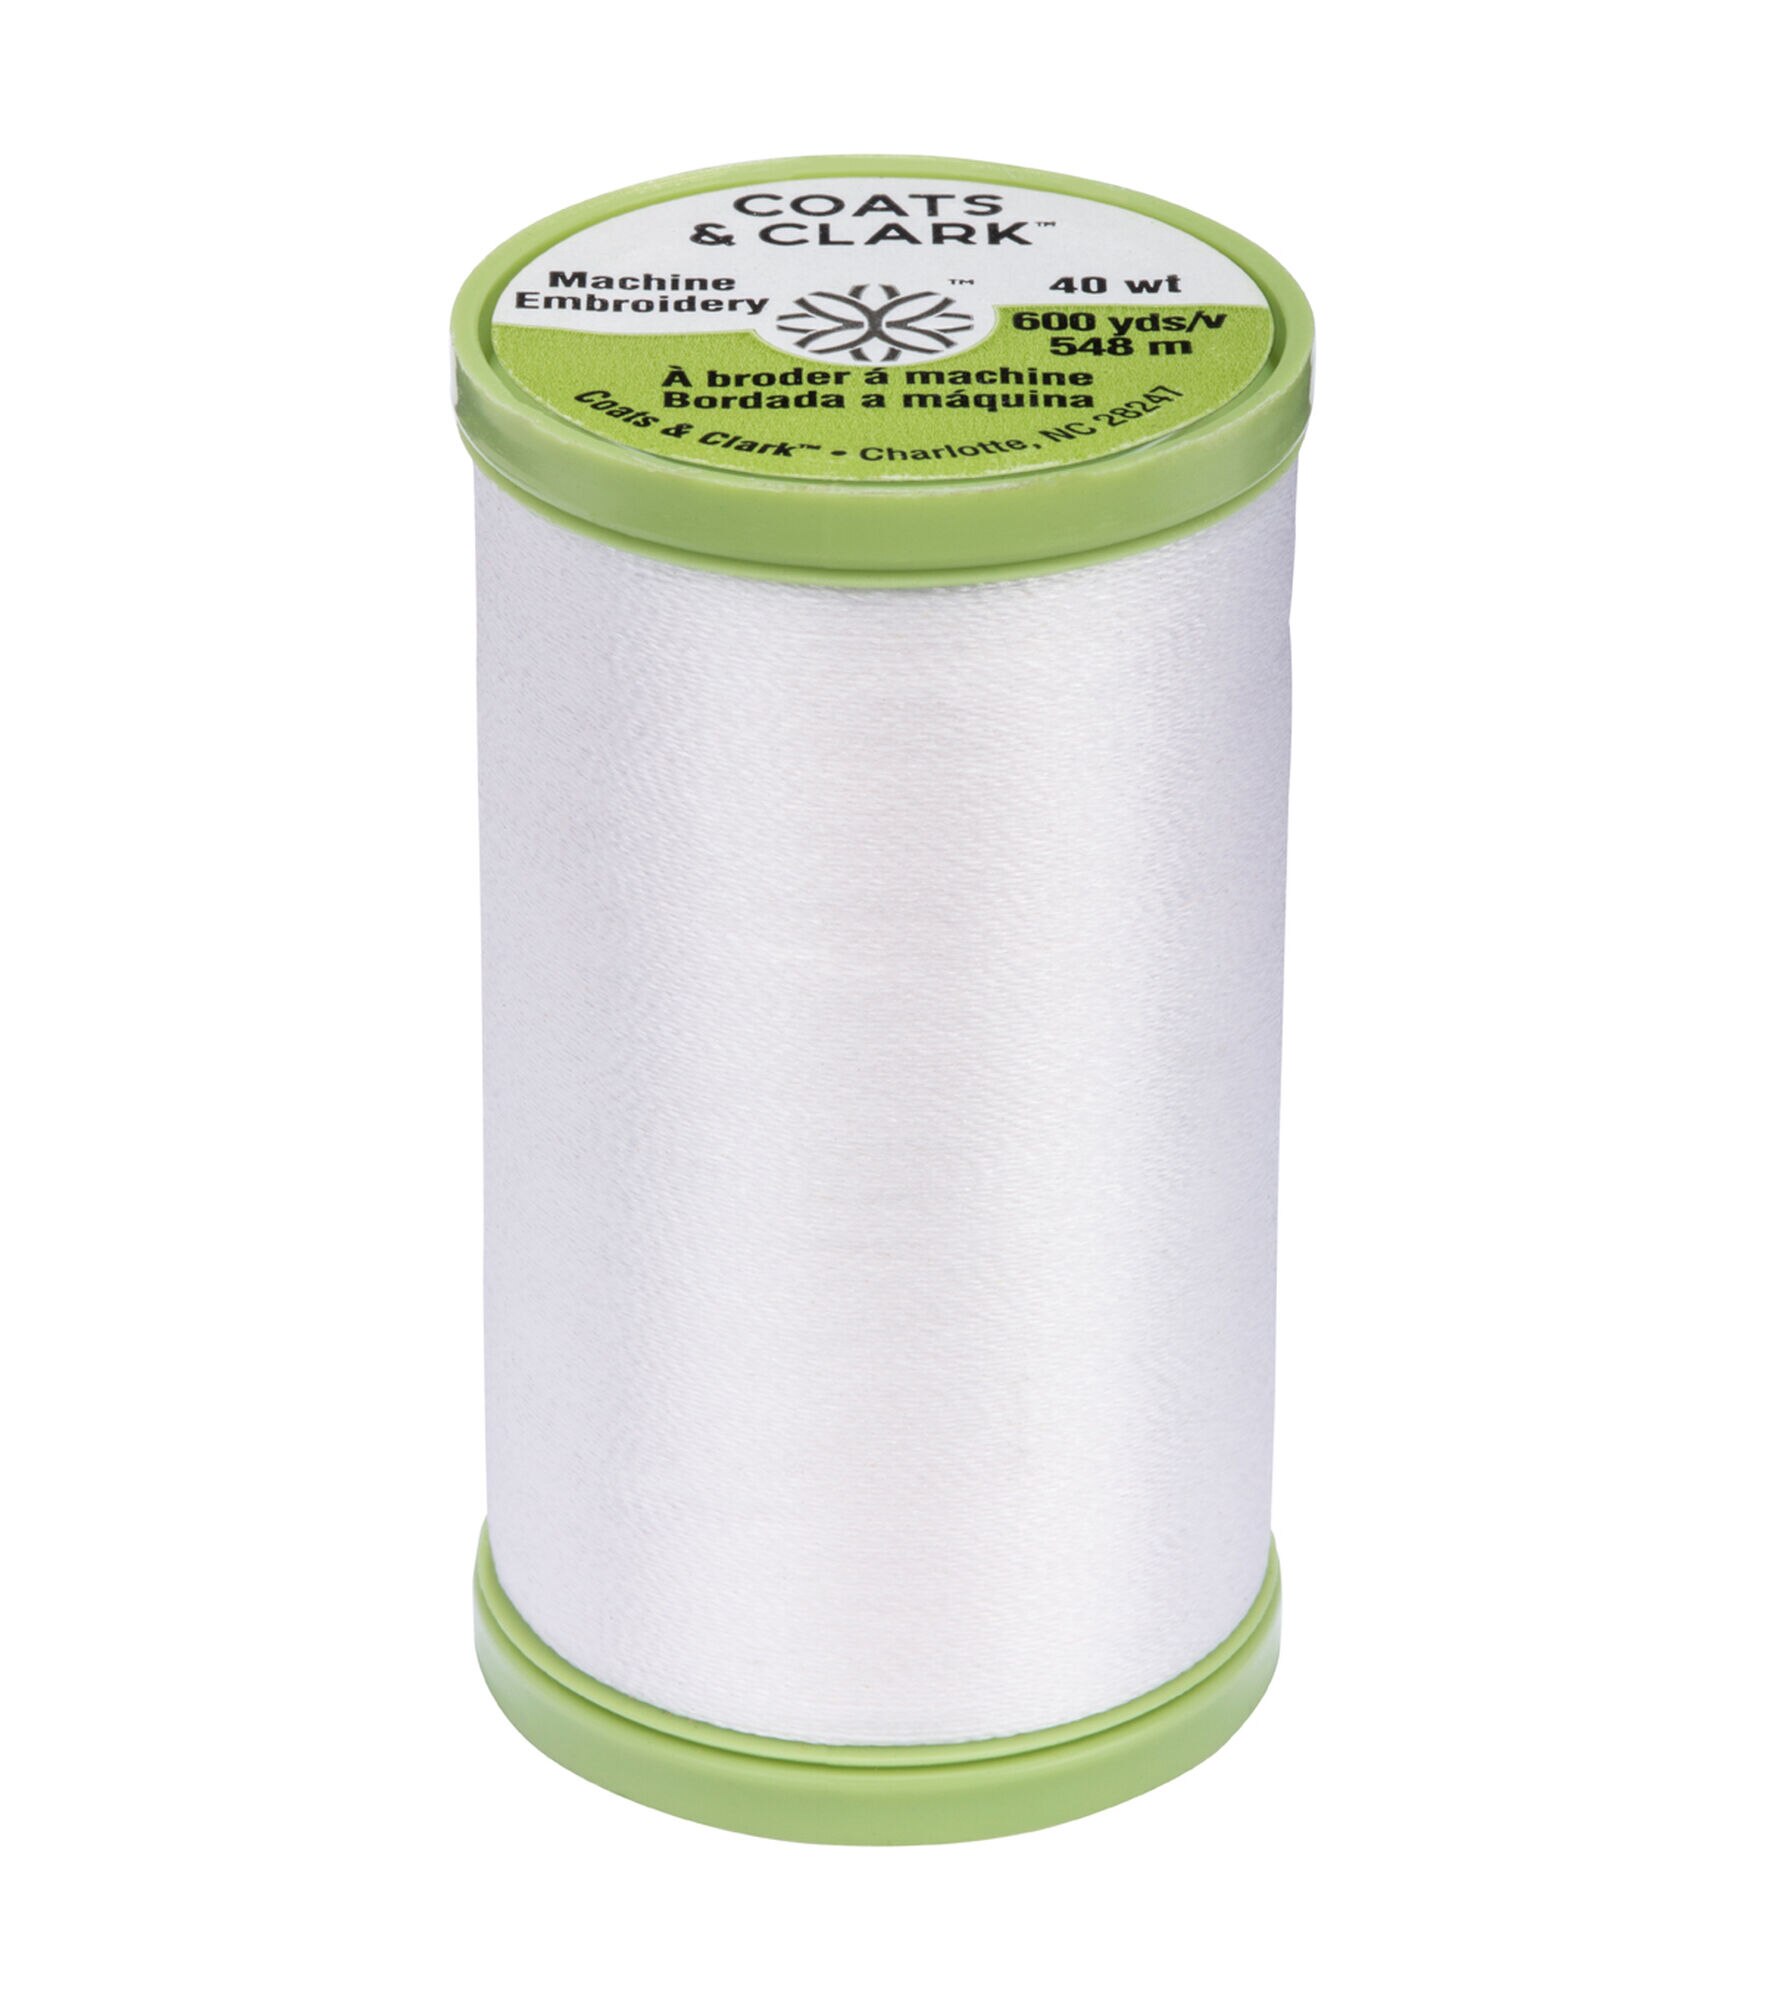 Coats Trilobal Polyester Embroidery Thread - Tex 27 - 1,100 yds